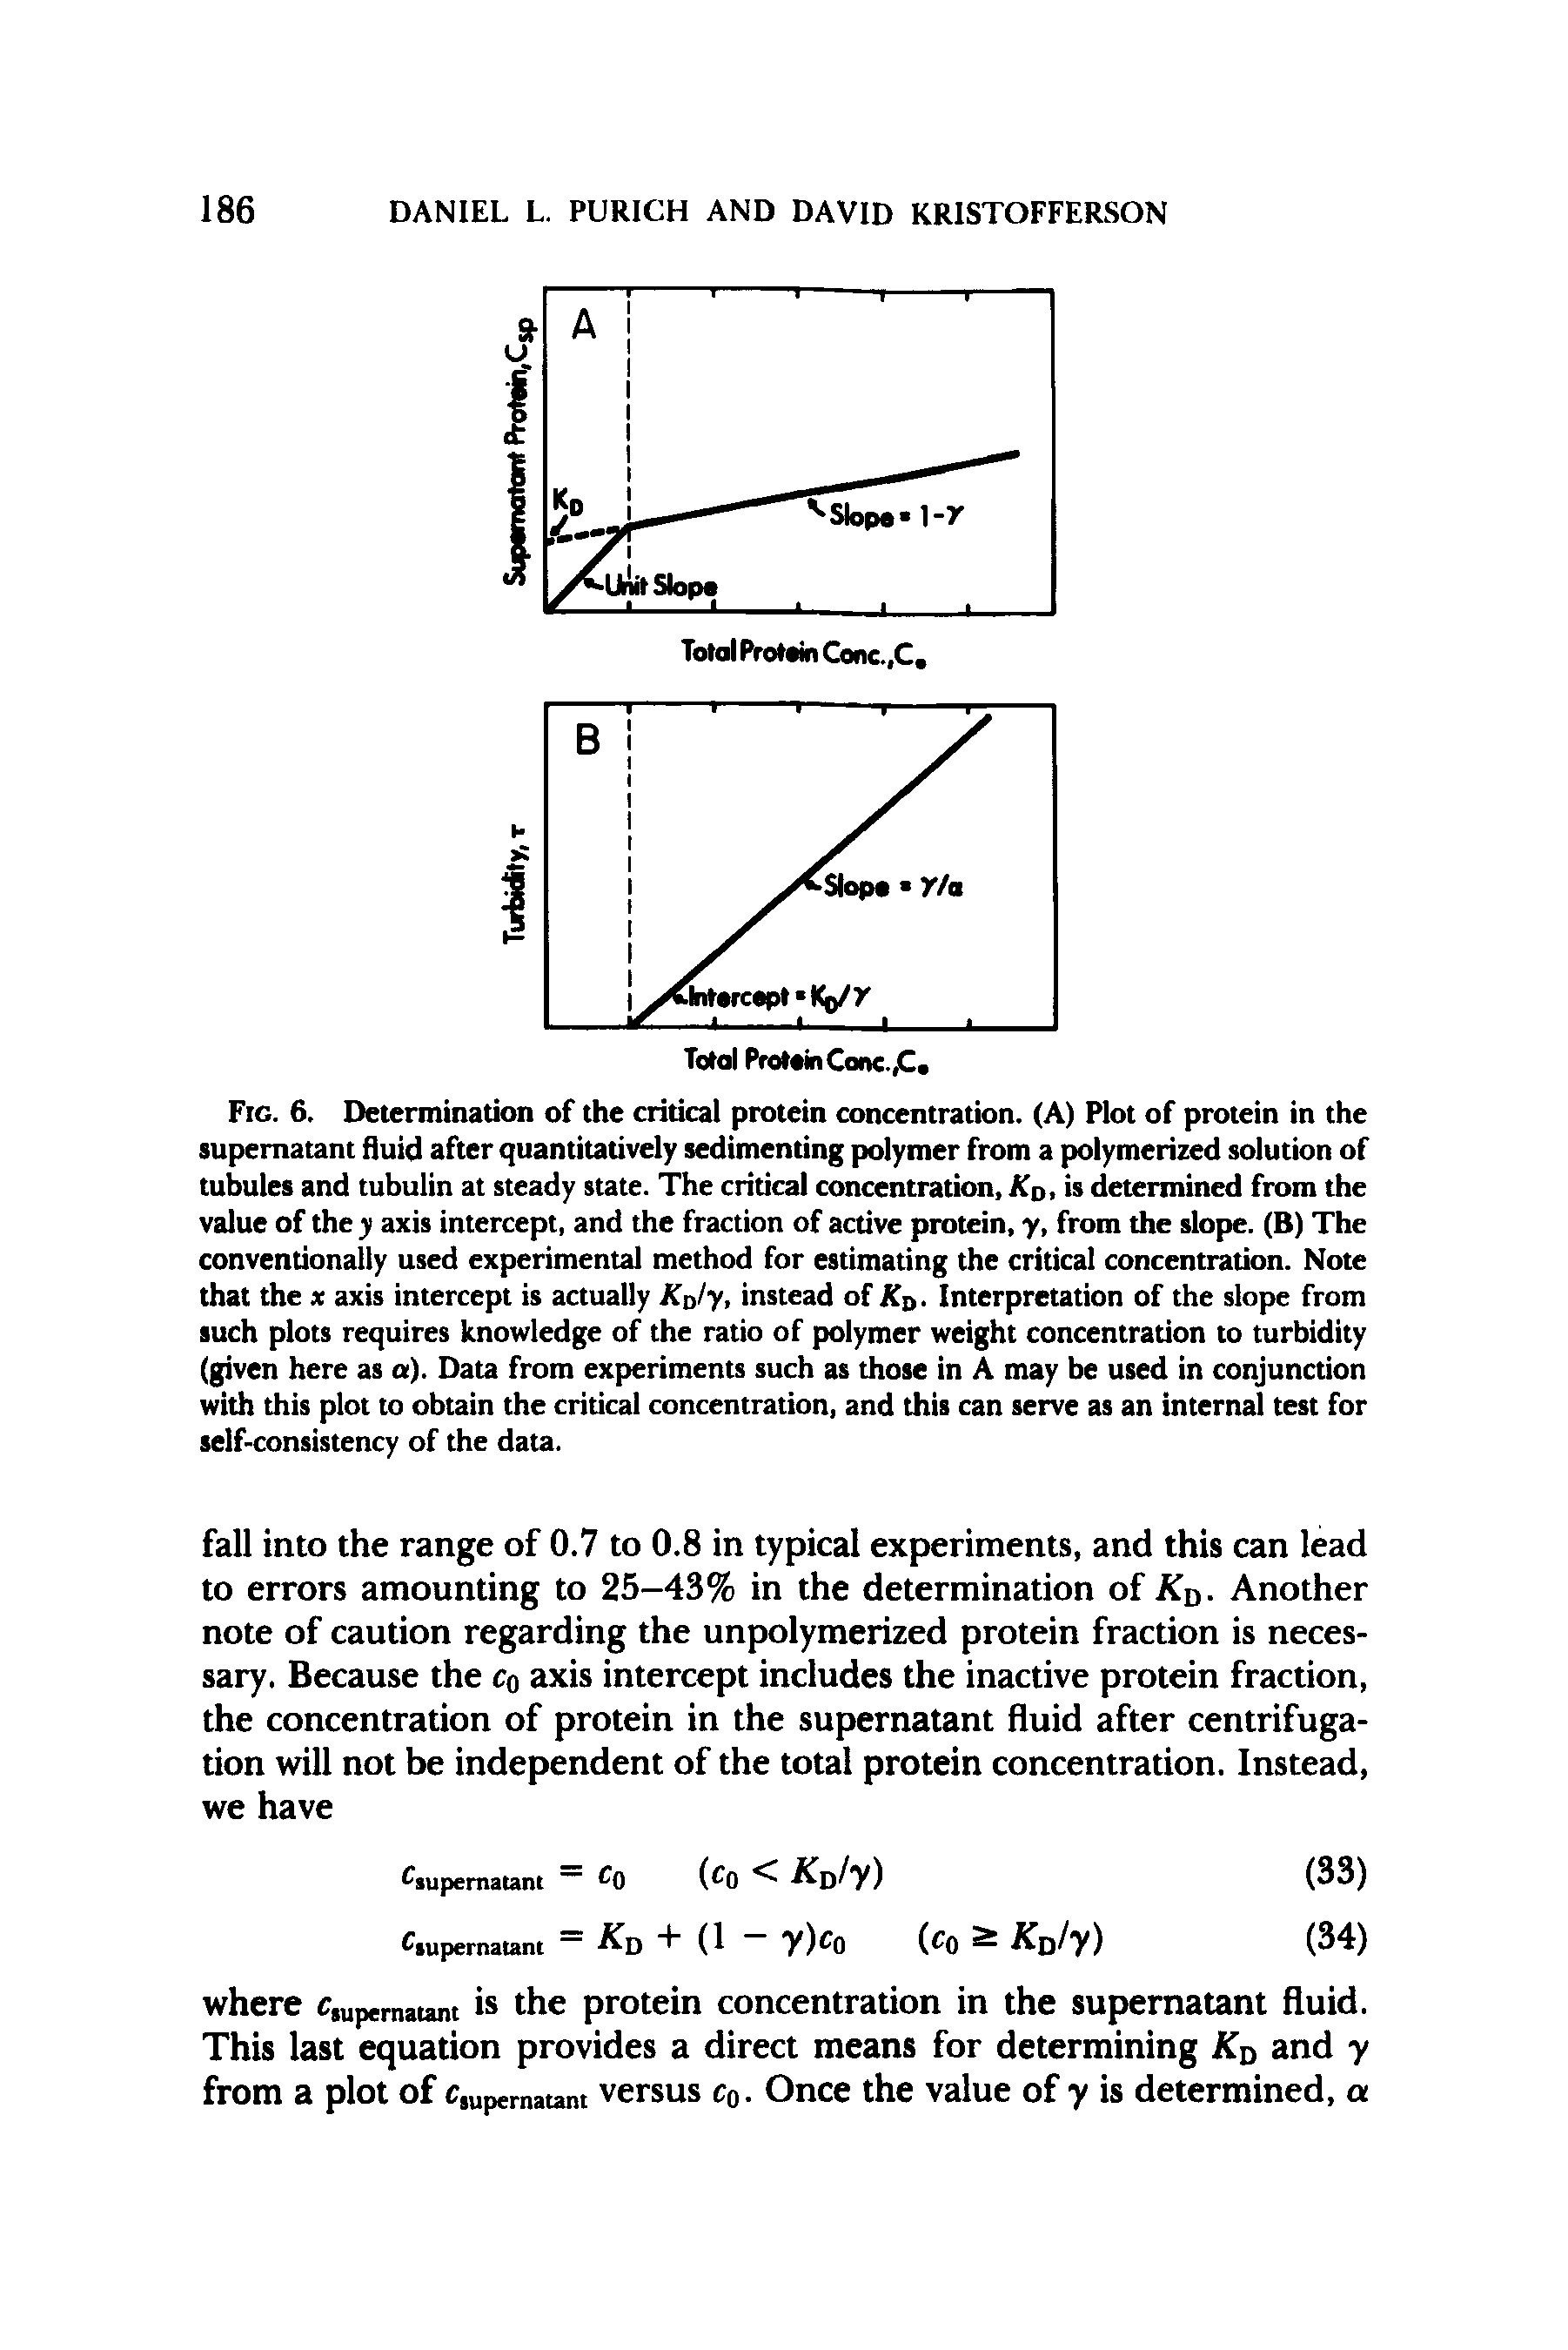 Fig. 6. Determination of the critical protein concentration. (A) Plot of protein in the supernatant fluid after quantitatively sedimenting polymer from a polymerized solution of tubules and tubulin at steady state. The critical concentration, Ko, is determined from the value of the y axis intercept, and the fraction of active protein, y, from the slope. (B) The conventionally used experimental method for estimating the critical concentration. Note that the x axis intercept is actually Ko/y, instead of Kj,. Interpretation of the slope from such plots requires knowledge of the ratio of polymer weight concentradon to turbidity (given here as a). Data from experiments such as those in A may be used in conjunction with this plot to obtain the cridcal concentration, and this can serve as an internal test for self-consistency of the data.